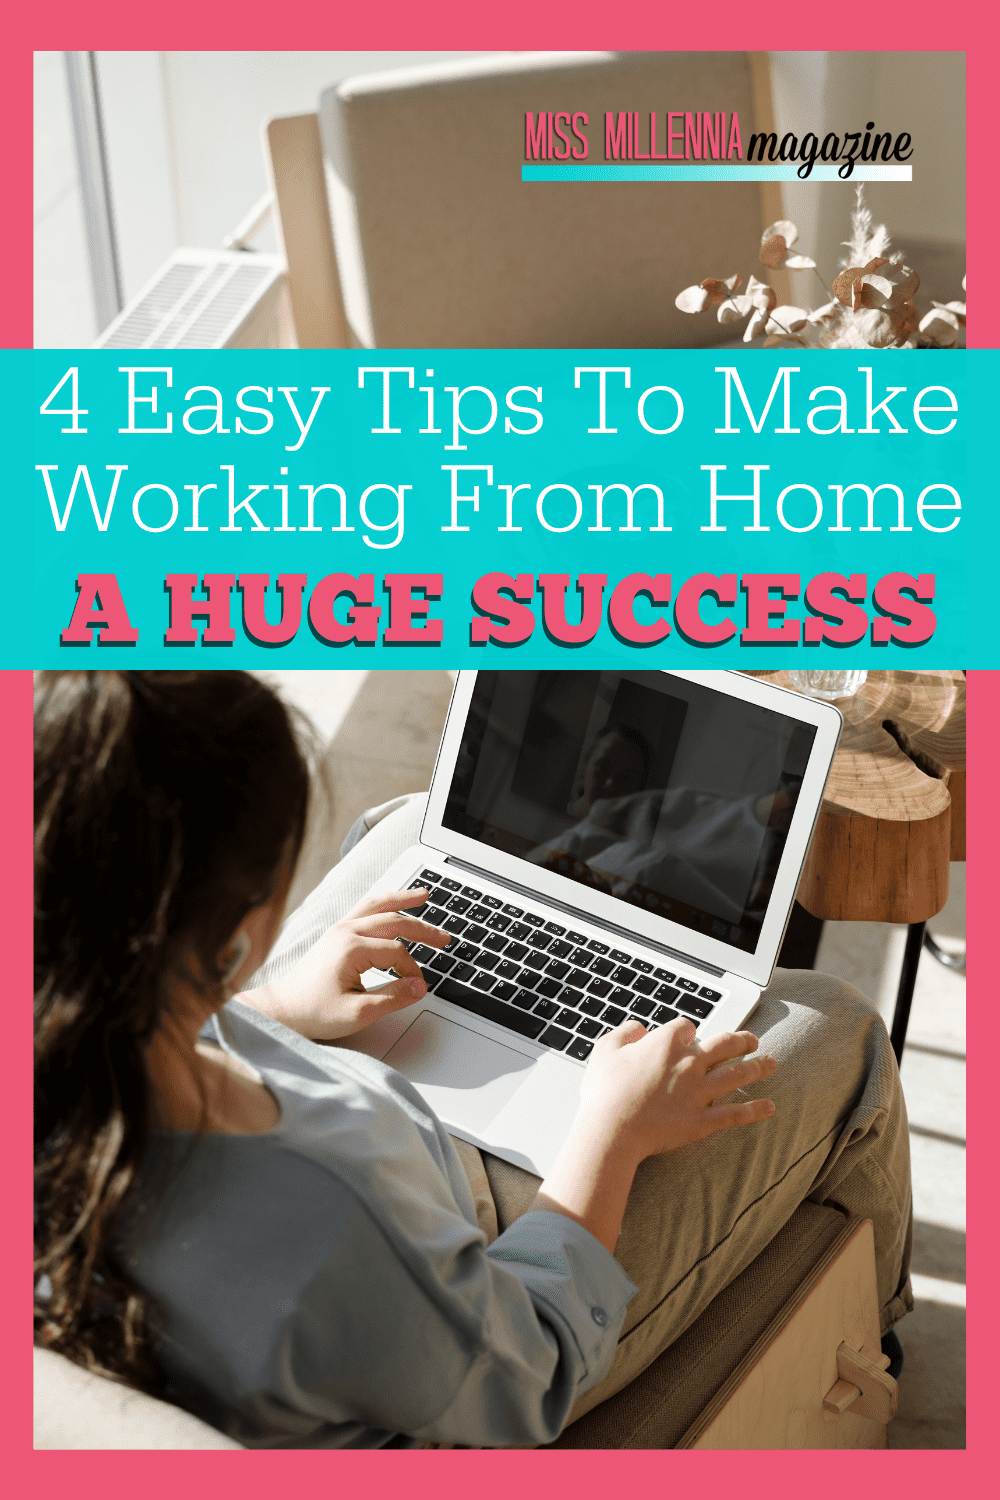 4 Easy Tips To Make Working From Home a Huge Success